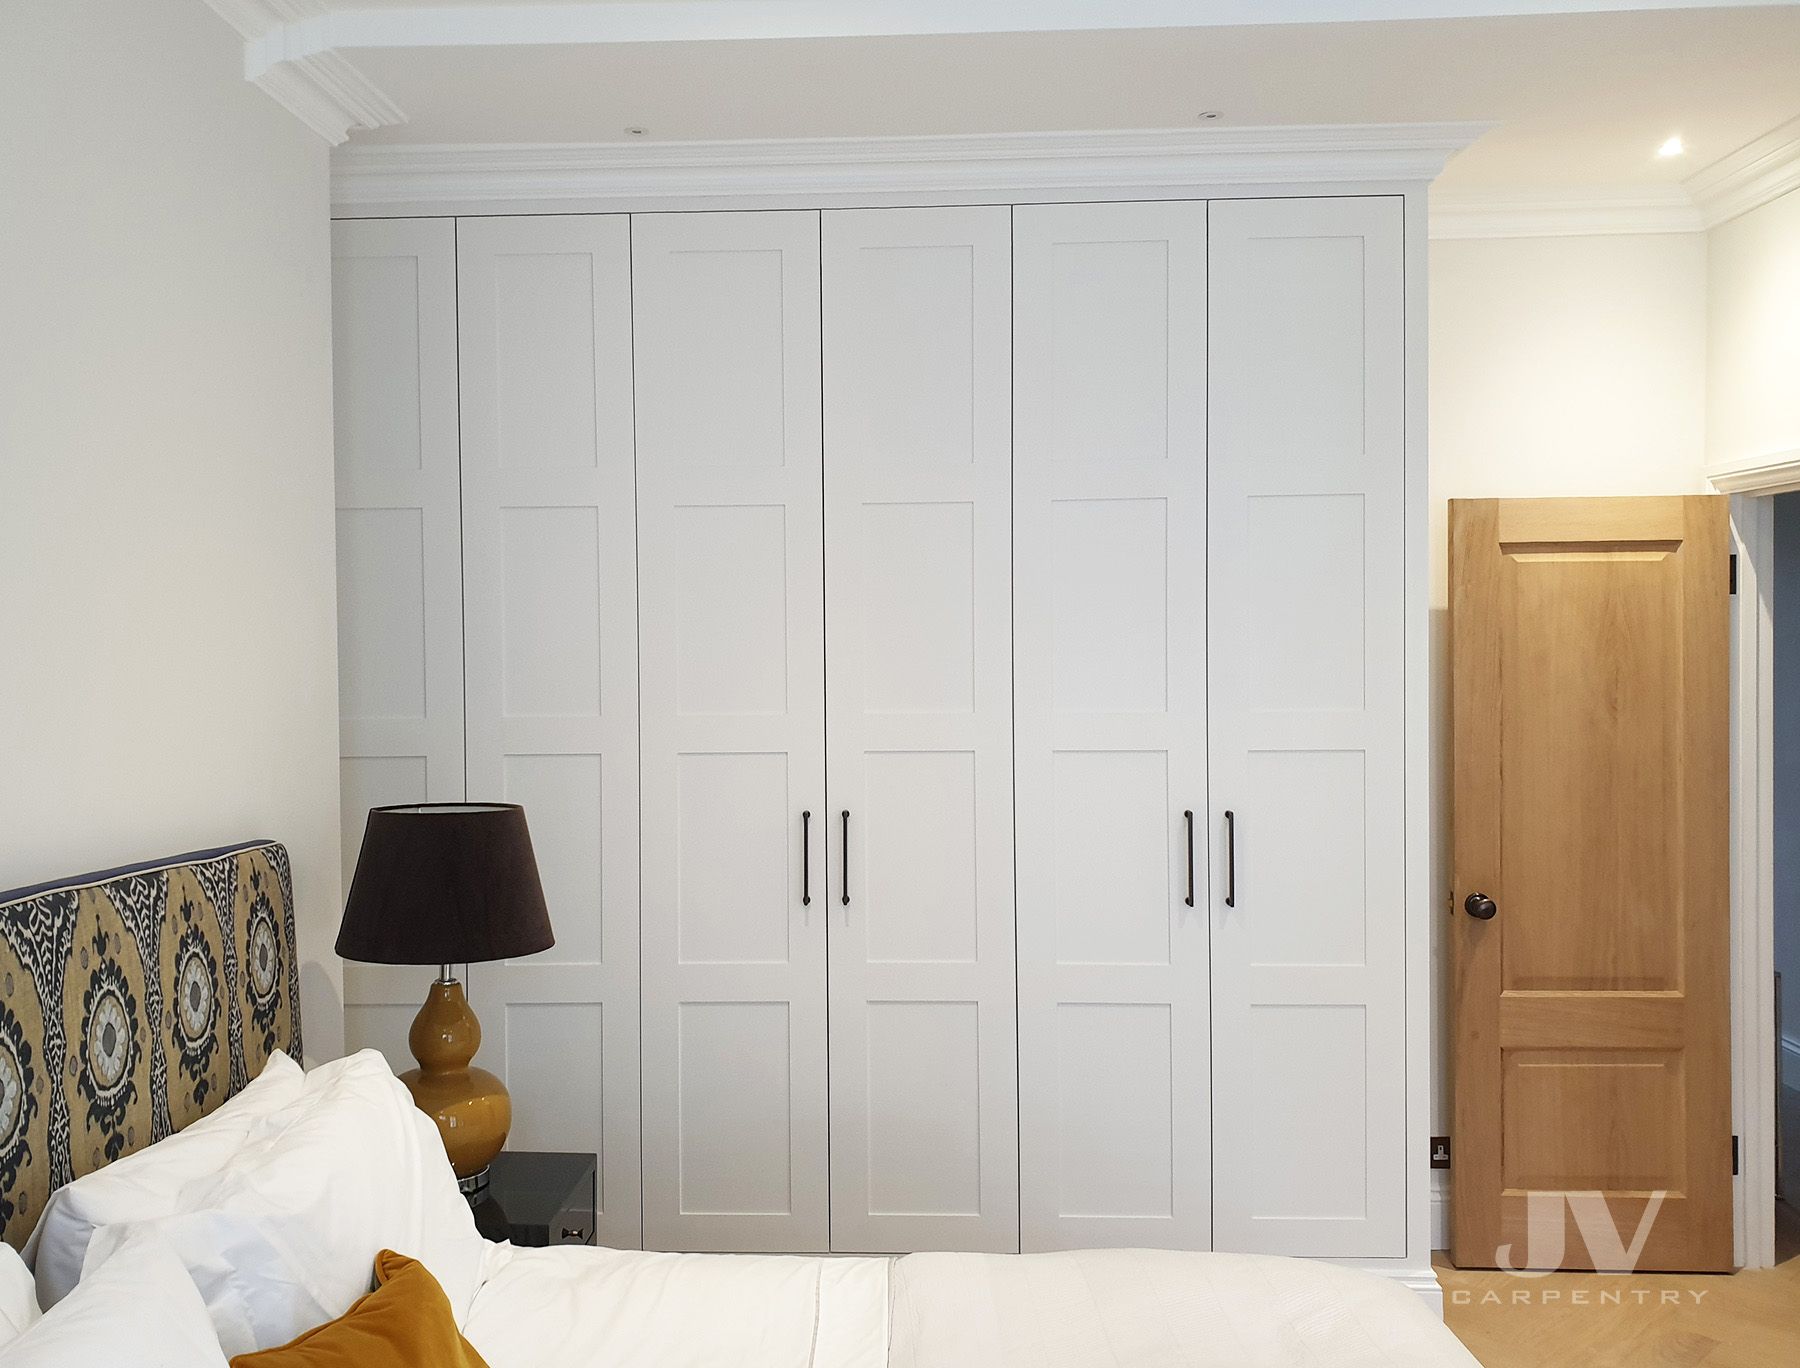 Fitted Wardrobes | Bespoke Bedroom Furniture | Jv Carpentry Pertaining To Where To  Wardrobes (View 10 of 15)